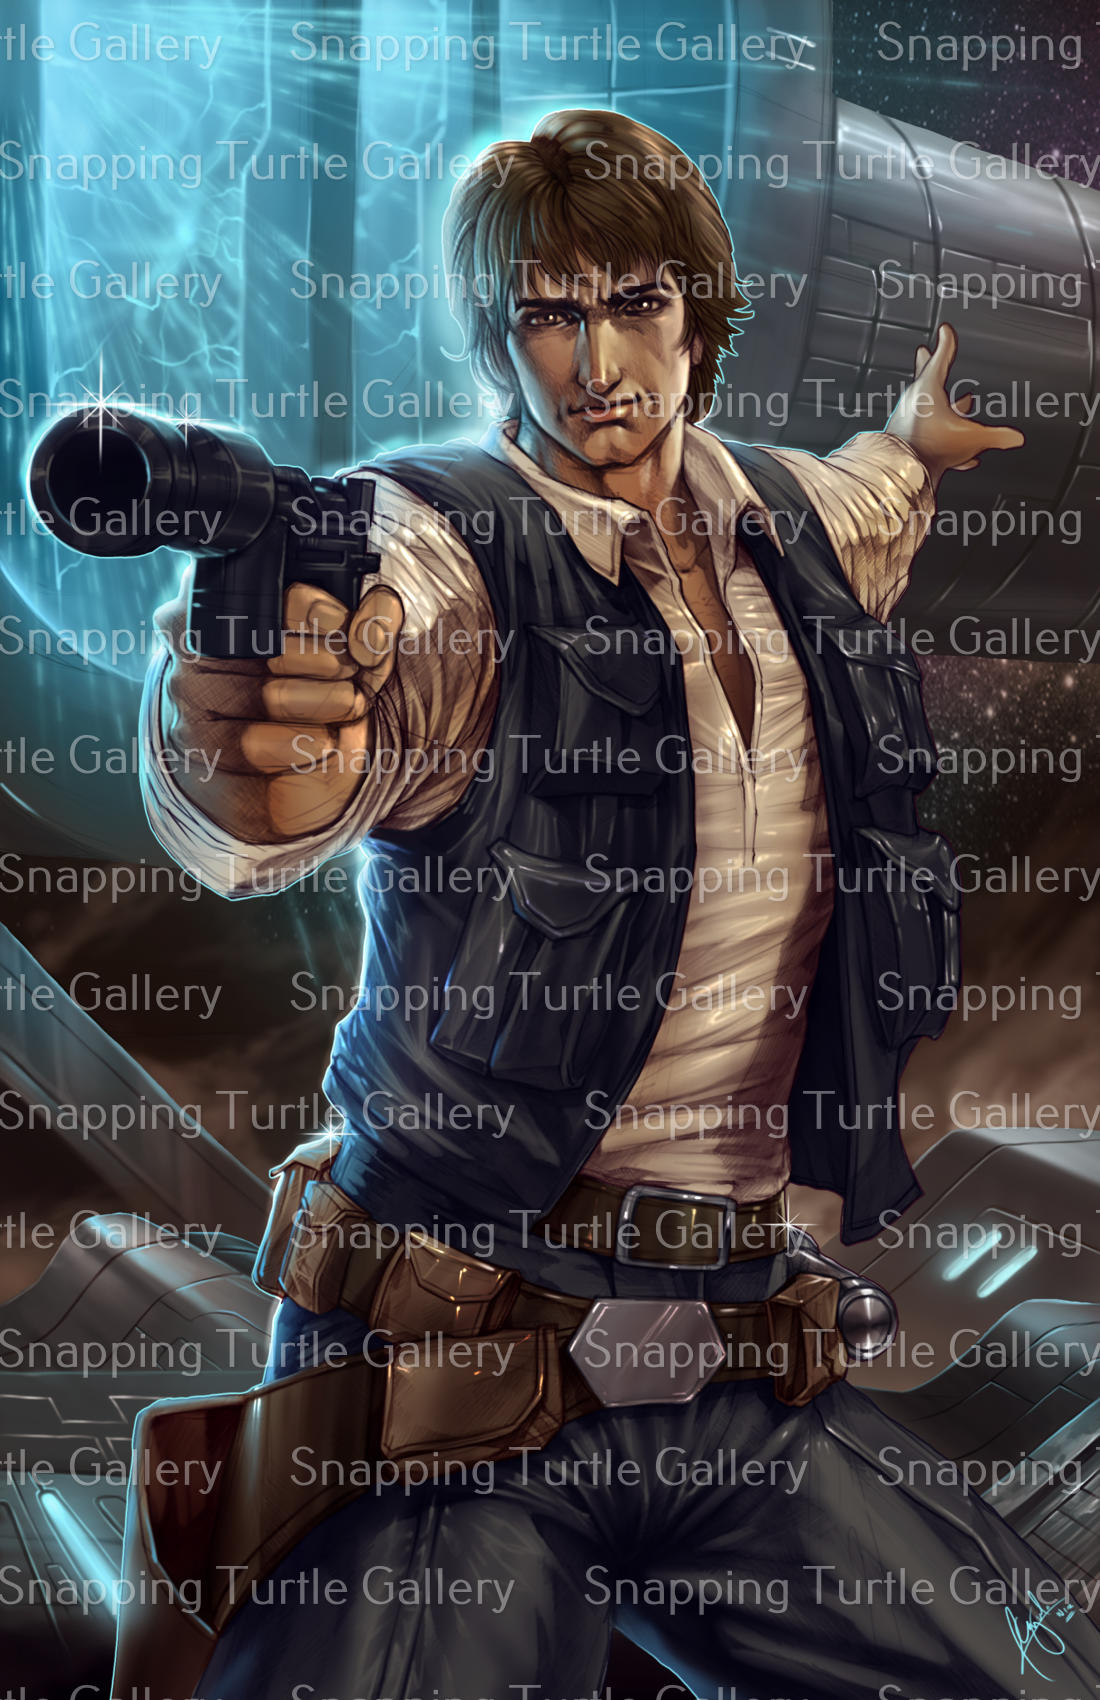 STAR WARS HAN SOLO Snapping Turtle Gallery